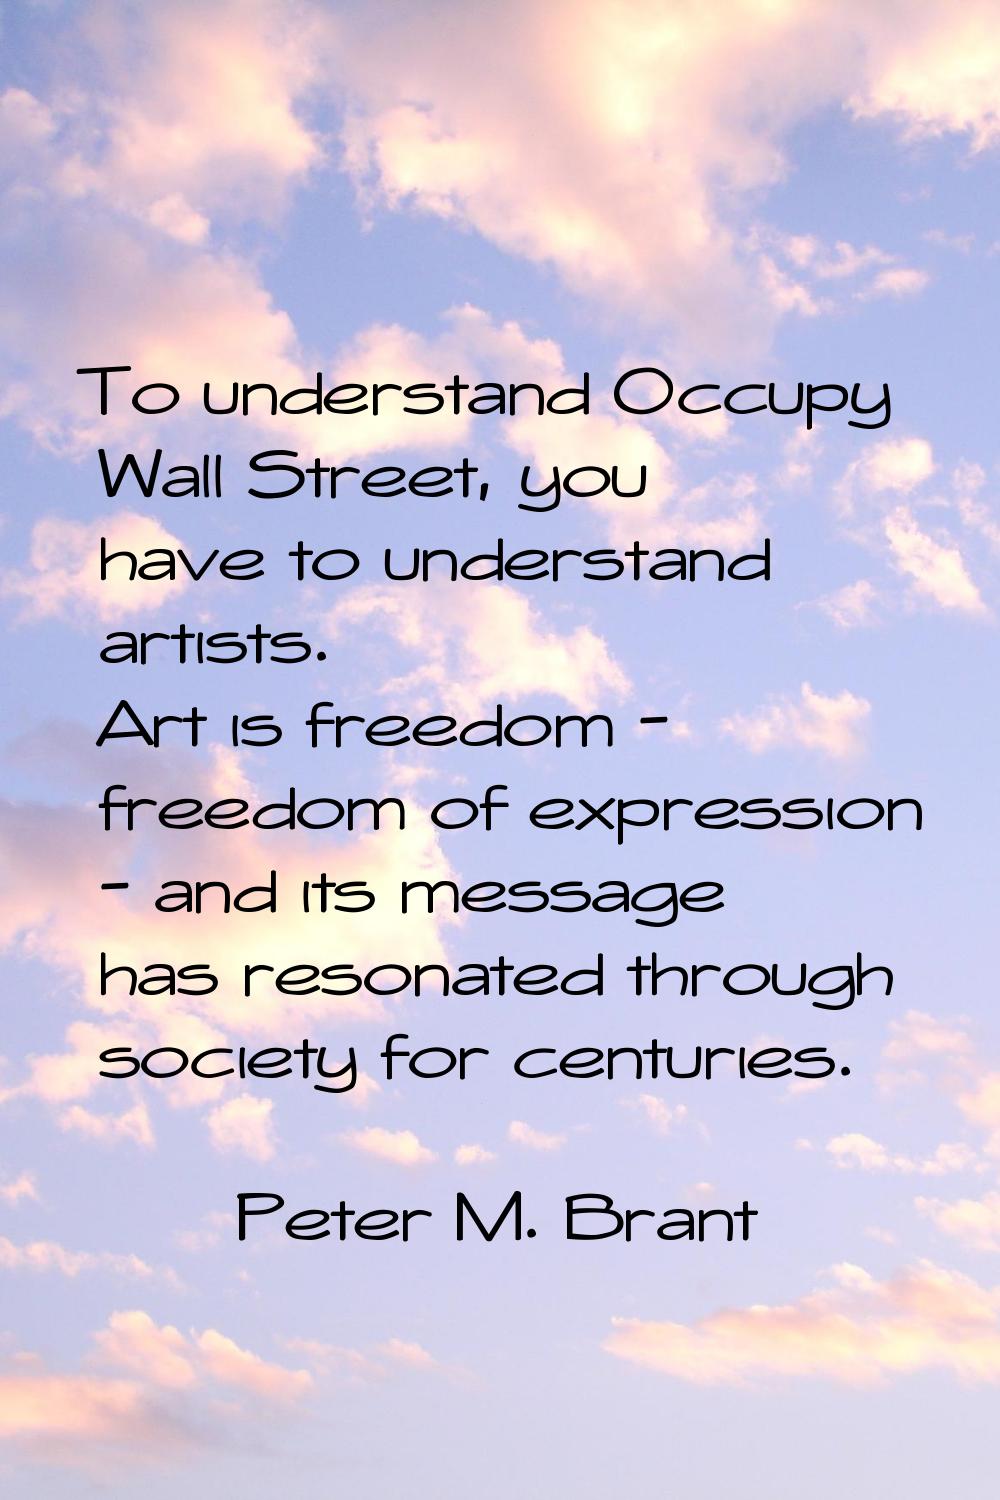 To understand Occupy Wall Street, you have to understand artists. Art is freedom - freedom of expre